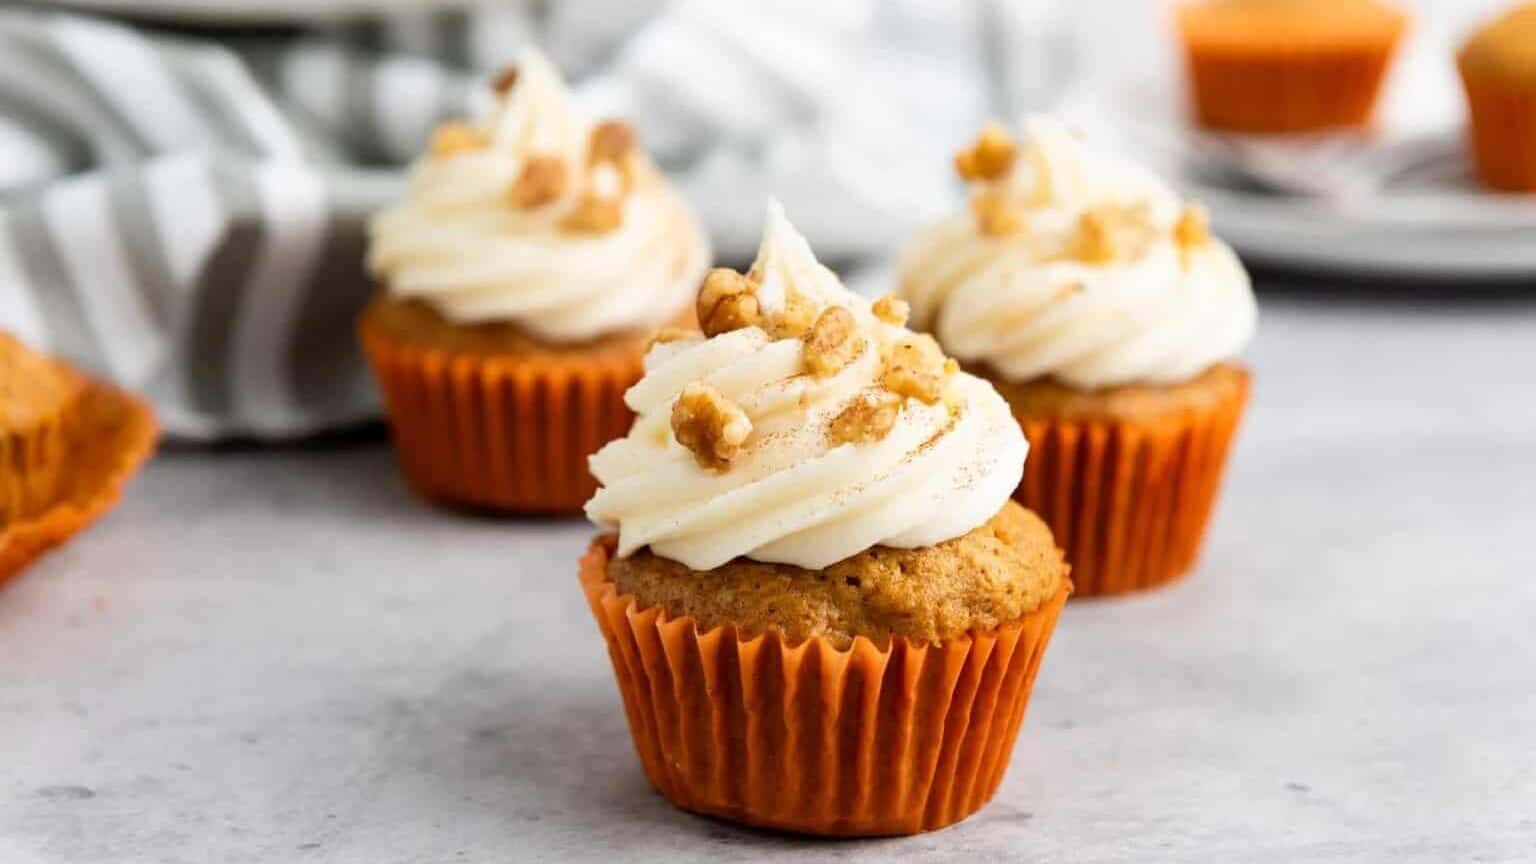 Pumpkin cupcakes with whipped cream and walnuts.